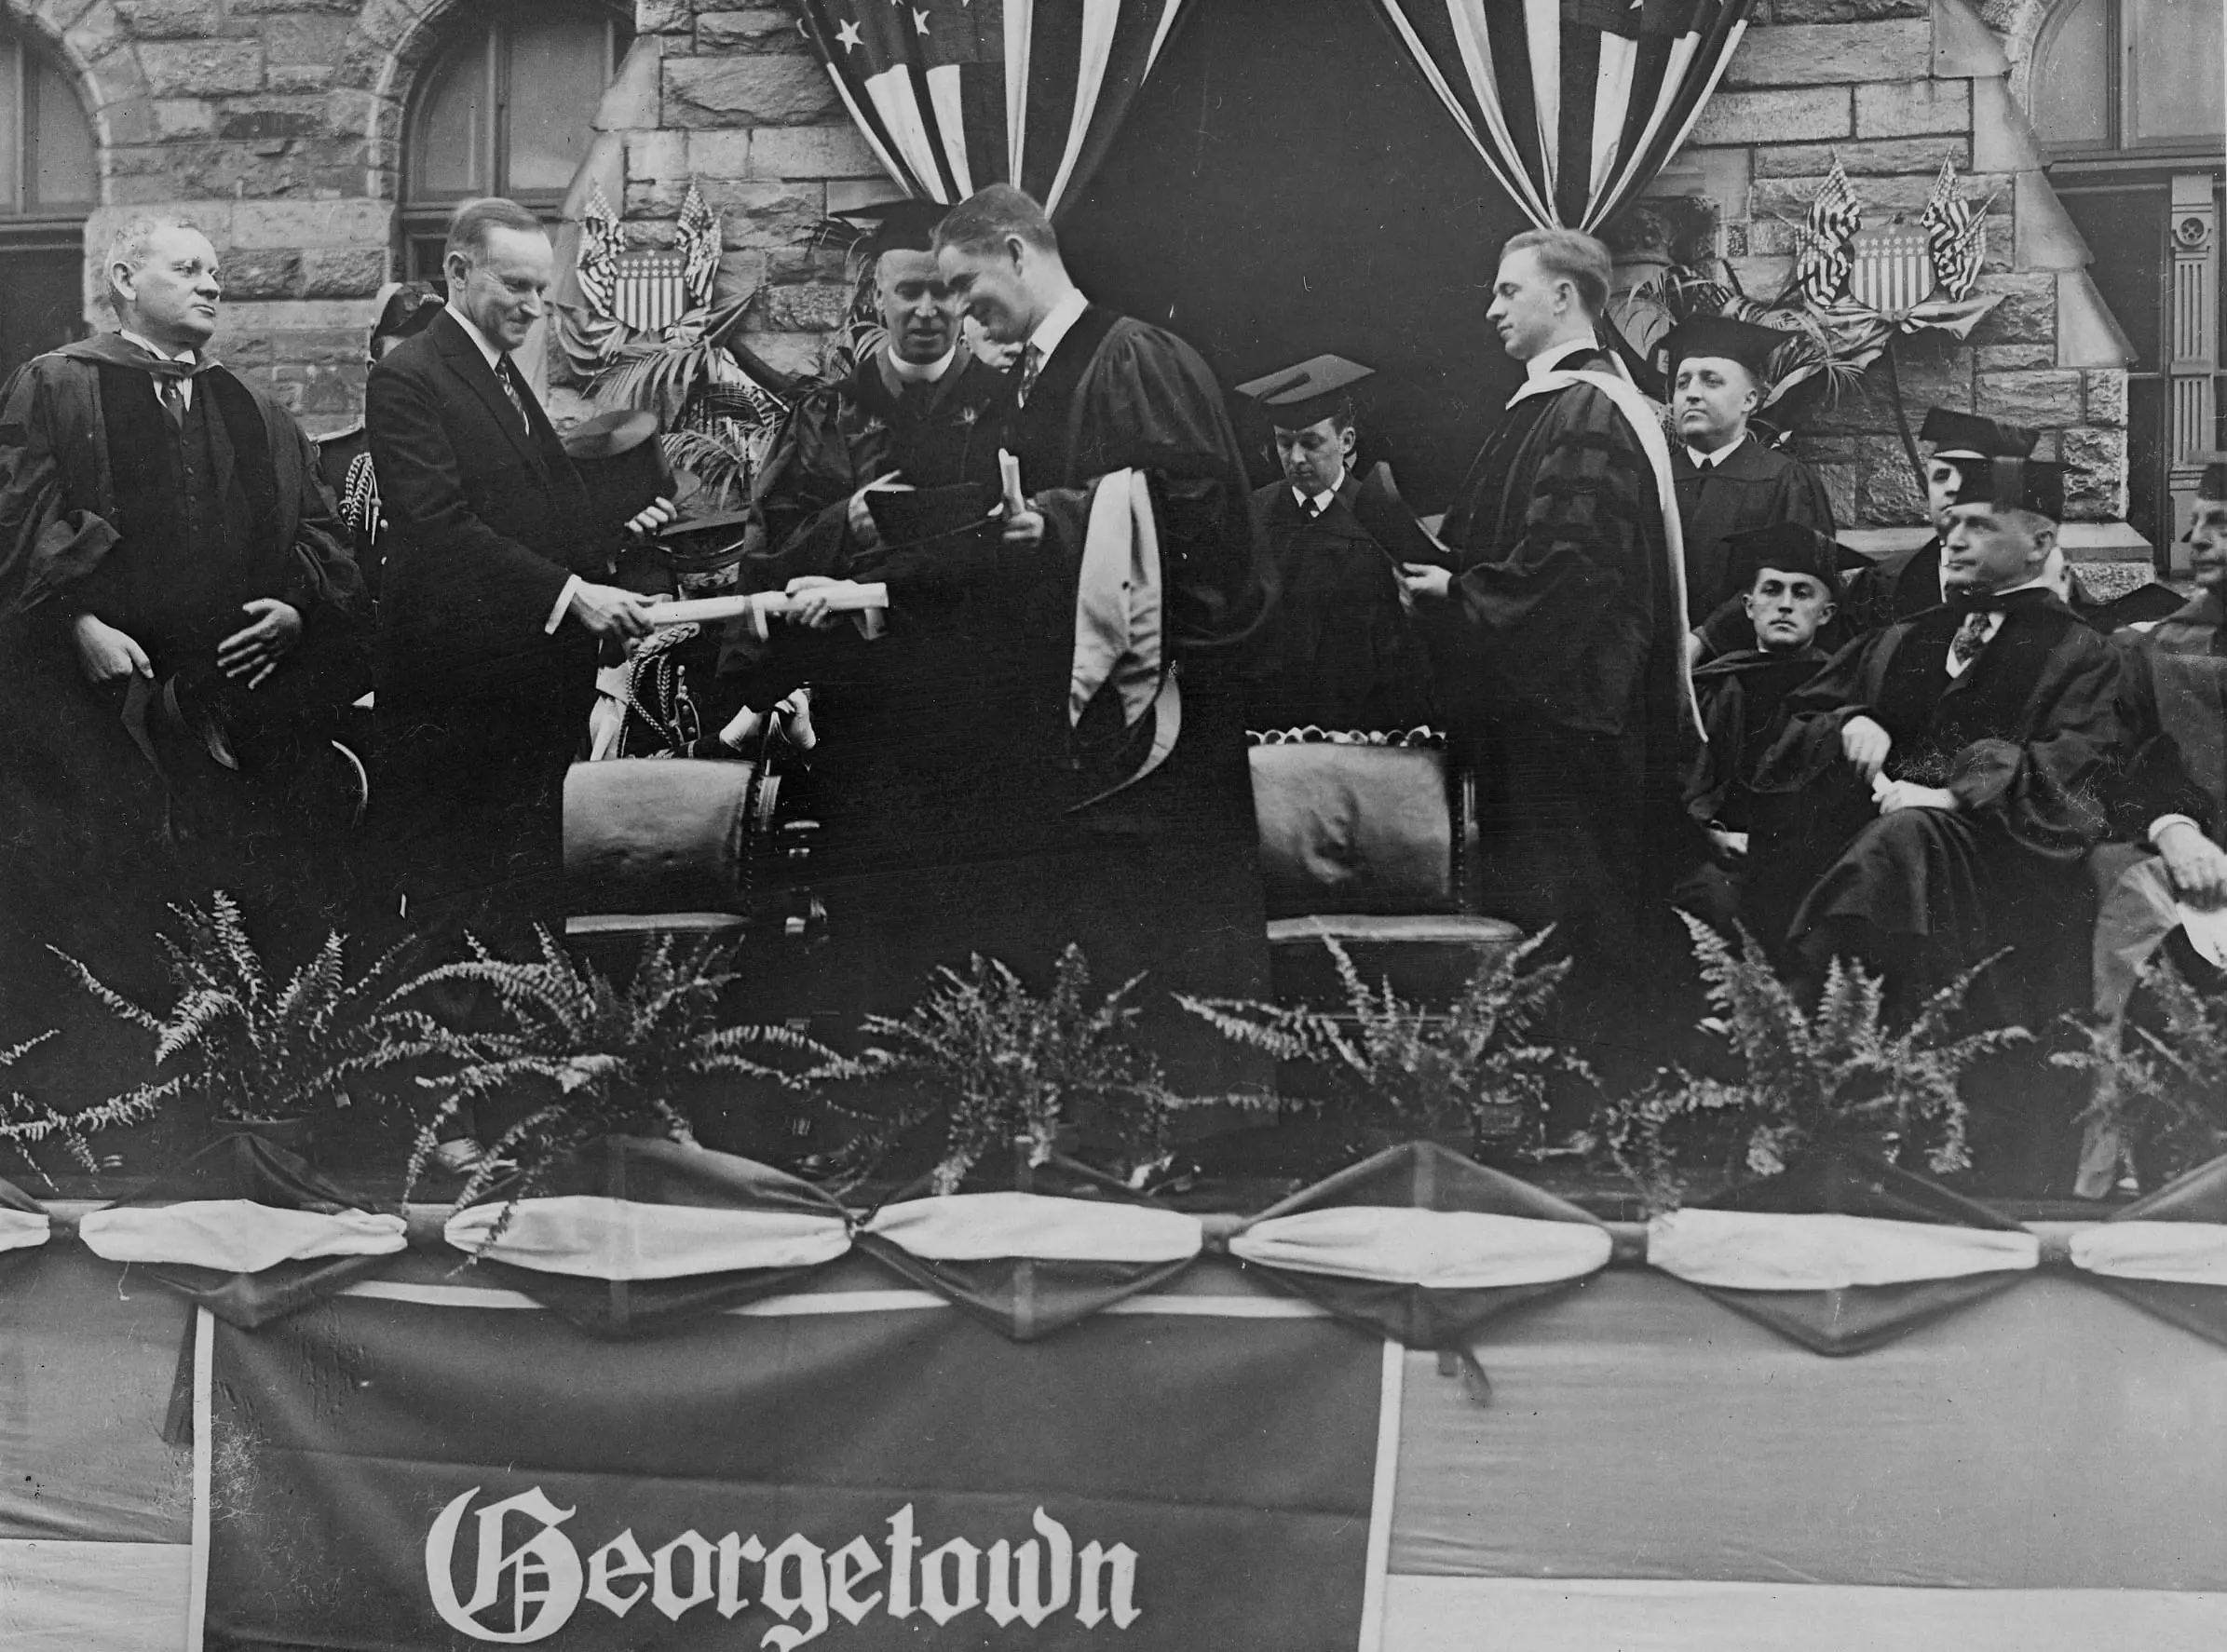 Calvin Coolidge, President of the United States, presents an honorary degree to Governor William S. Flynn of Rhode Island at the Georgetown University commencement. Pictured, left to right: Pierce Butler, Associate Justice of the Supreme Court; President Coolidge; John B. Creeden, S.J., President of Georgetown University; Governor Flynn; Walter J. O'Connor, University Registrar; and Andrew L. Bouwhuis, S.J.